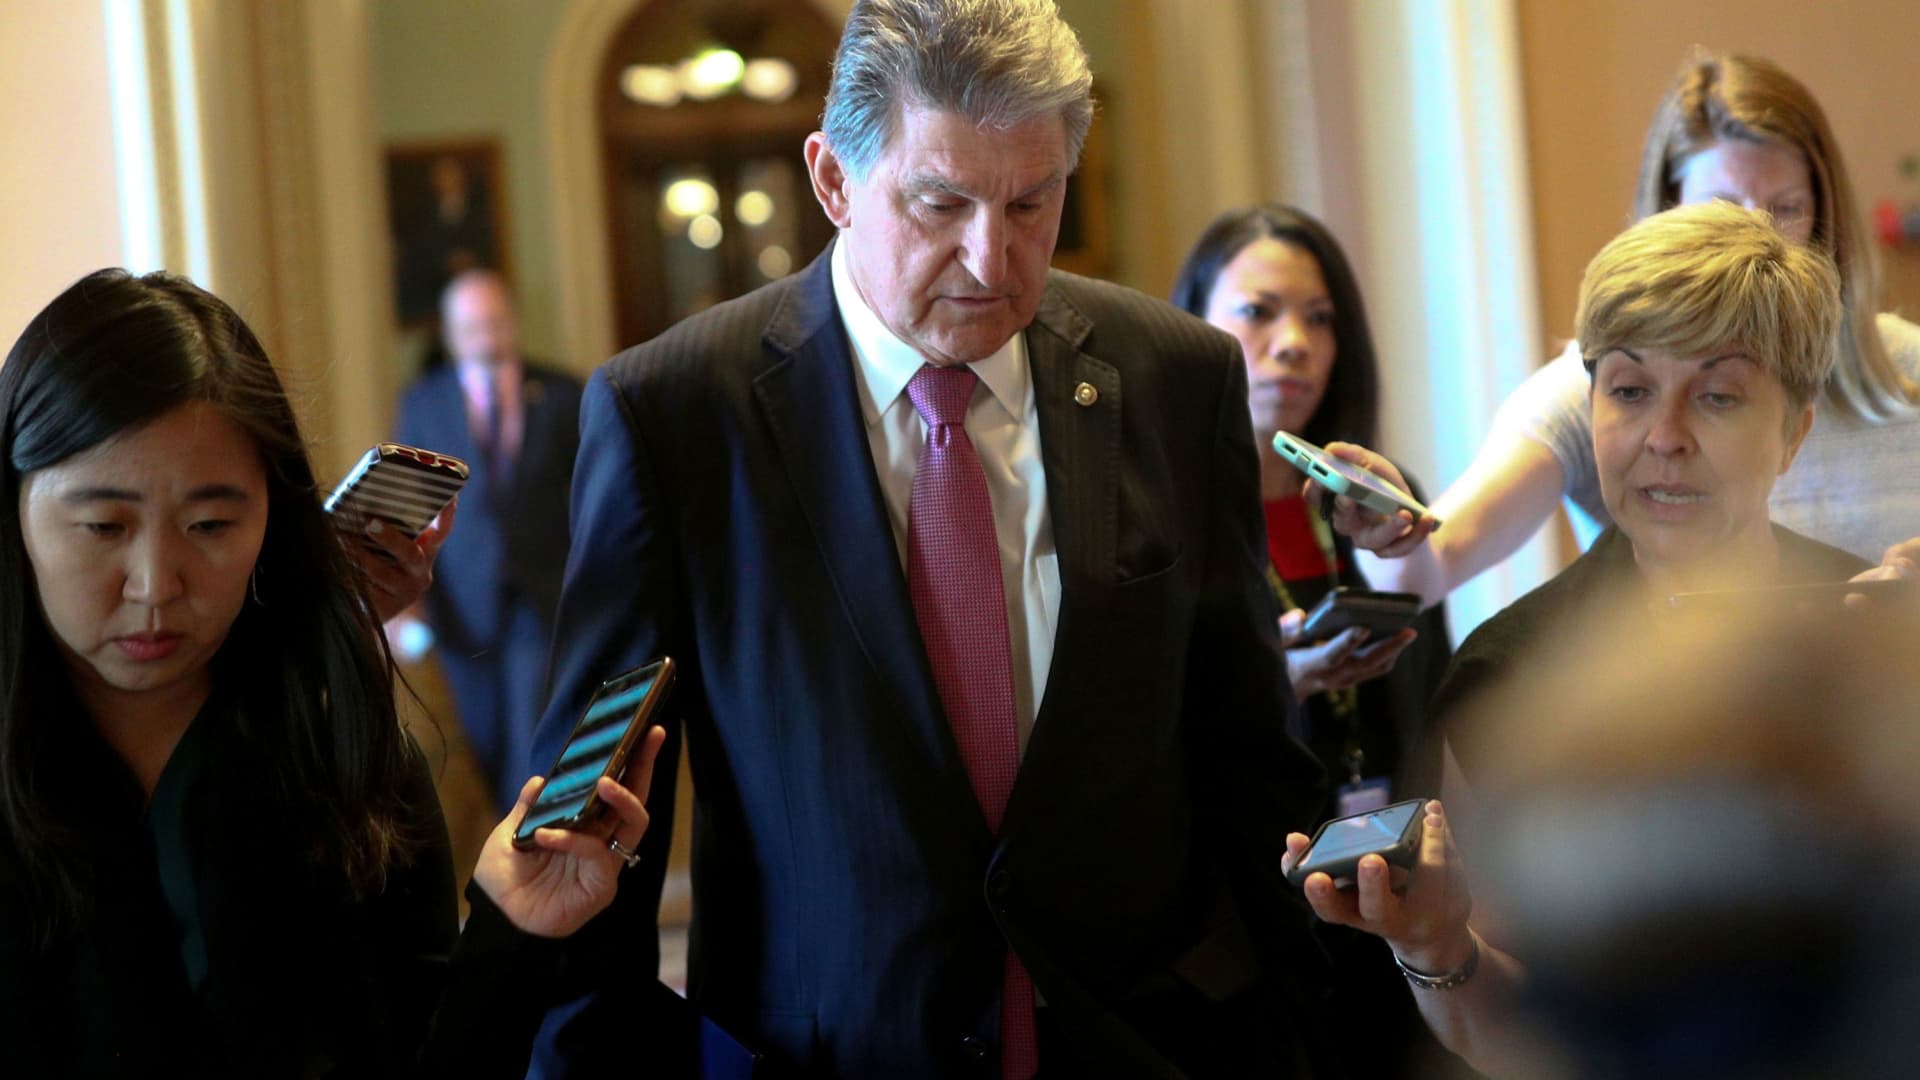 Senator Joe Manchin (D-WV) speaks to news reporters before attending a meeting on infrastructure on Capitol Hill in Washington, June 23, 2021.